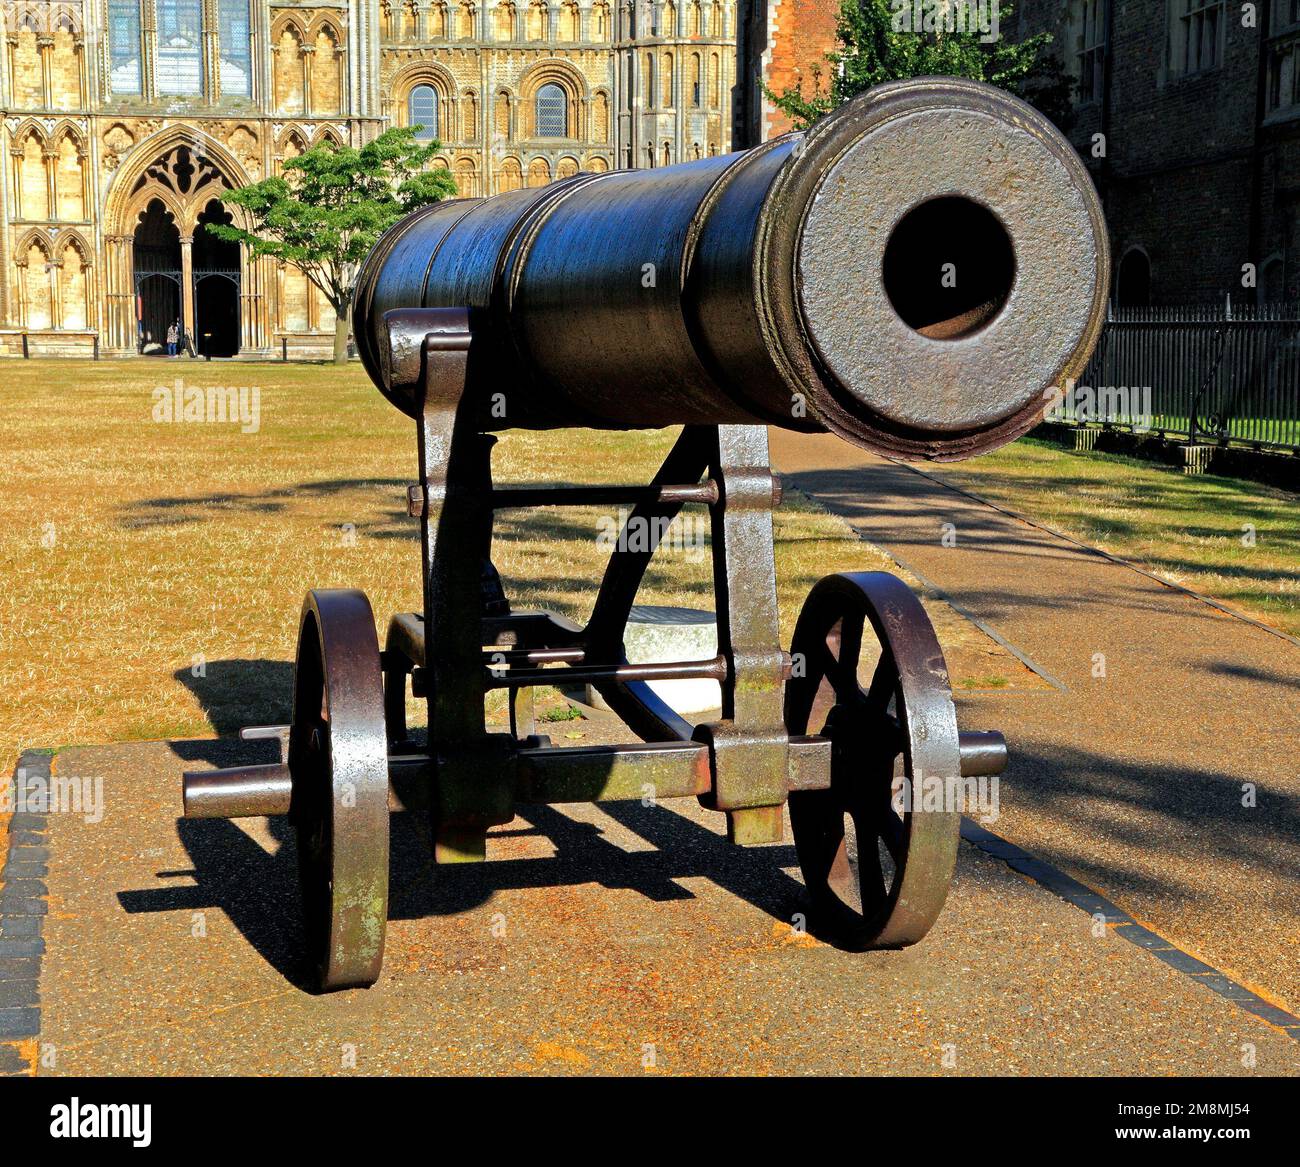 Ely, Russian Crimean Cannon, Palace Green, Cambridgeshire, England Stock Photo